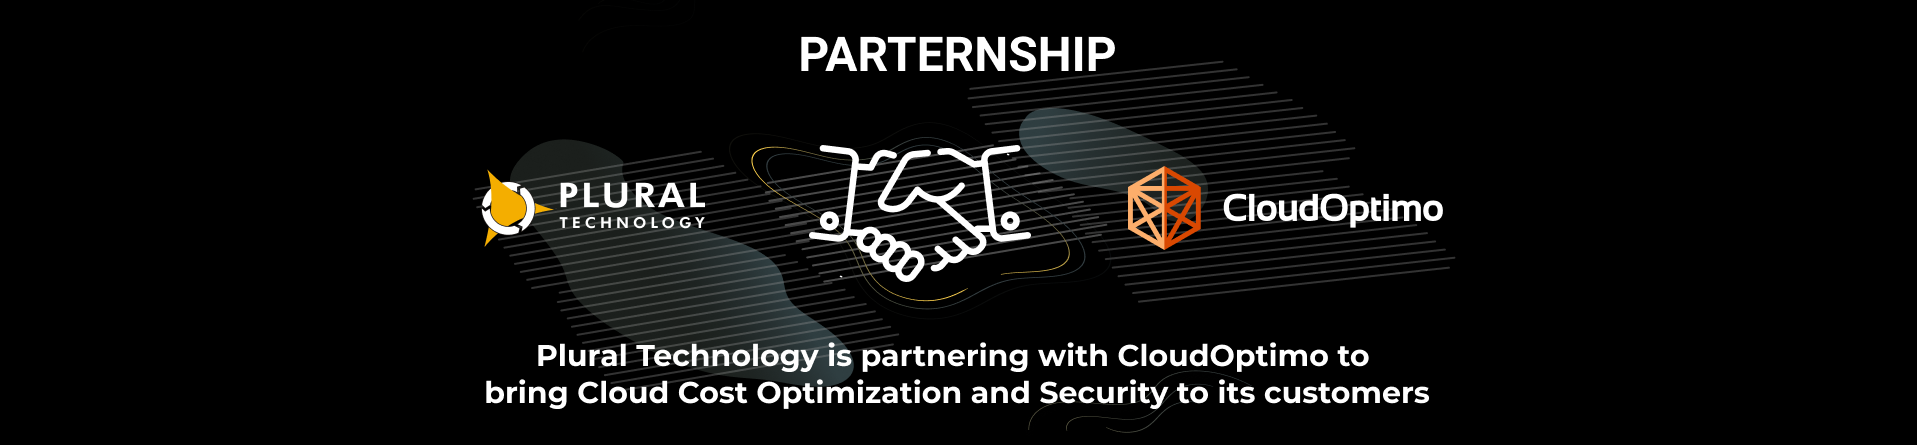 Plural Technology is partnering with CloudOptimo